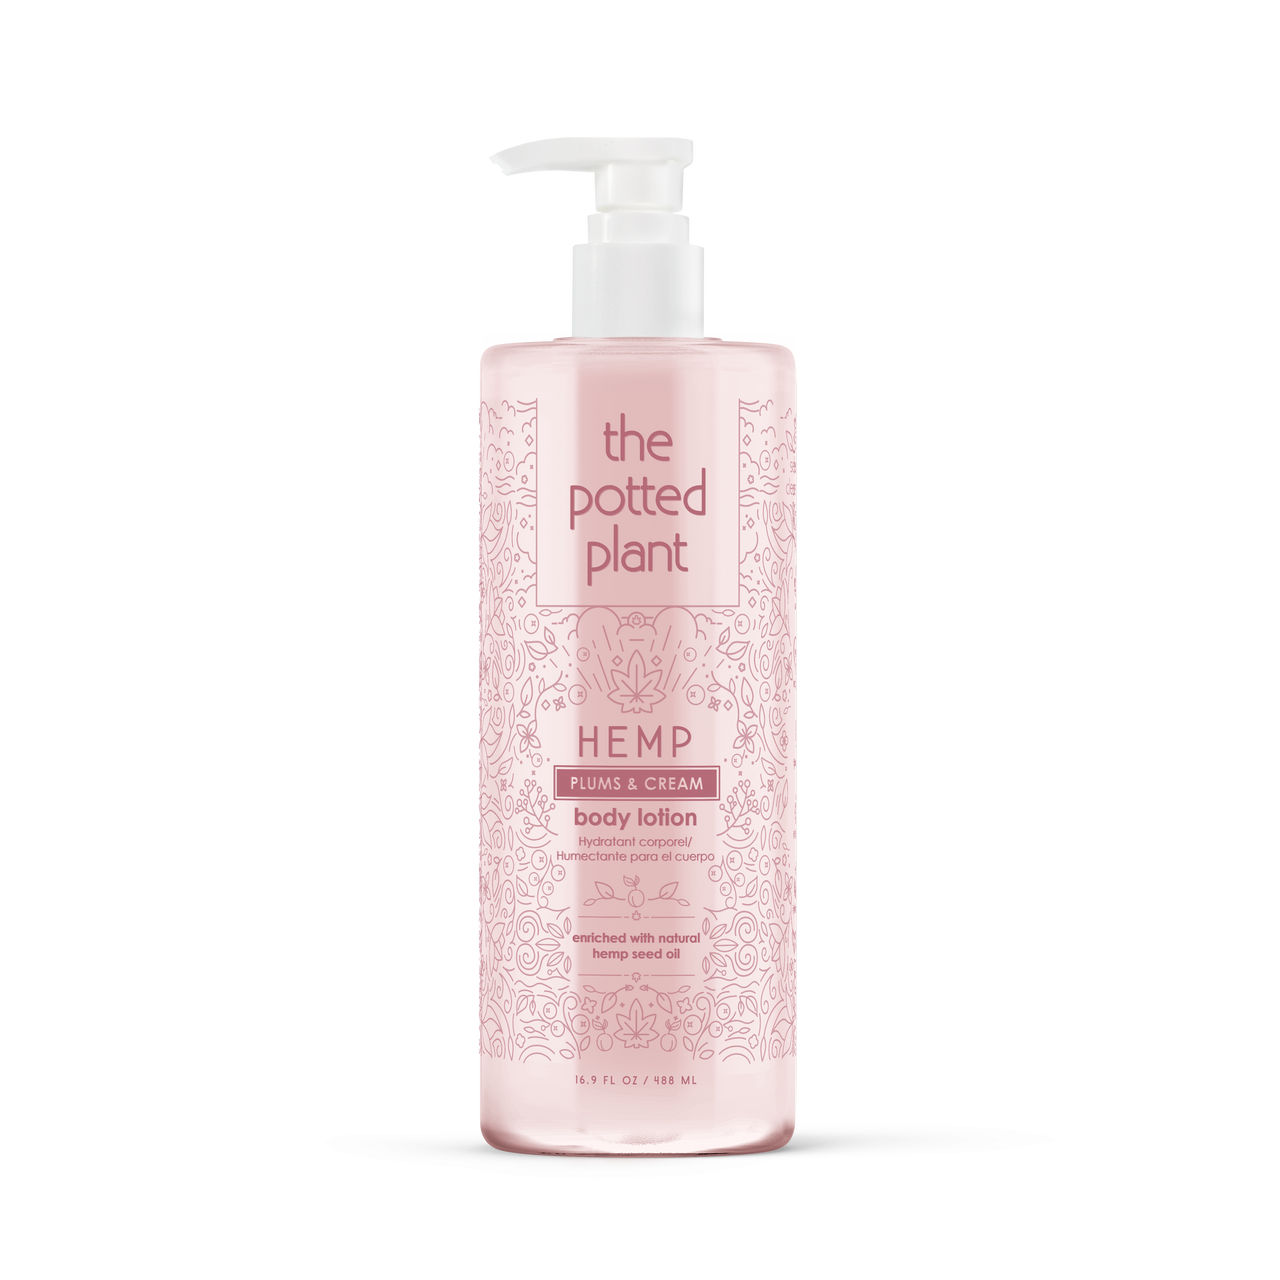 The Potted Plant Plums and Cream Body Lotion 16.9 oz